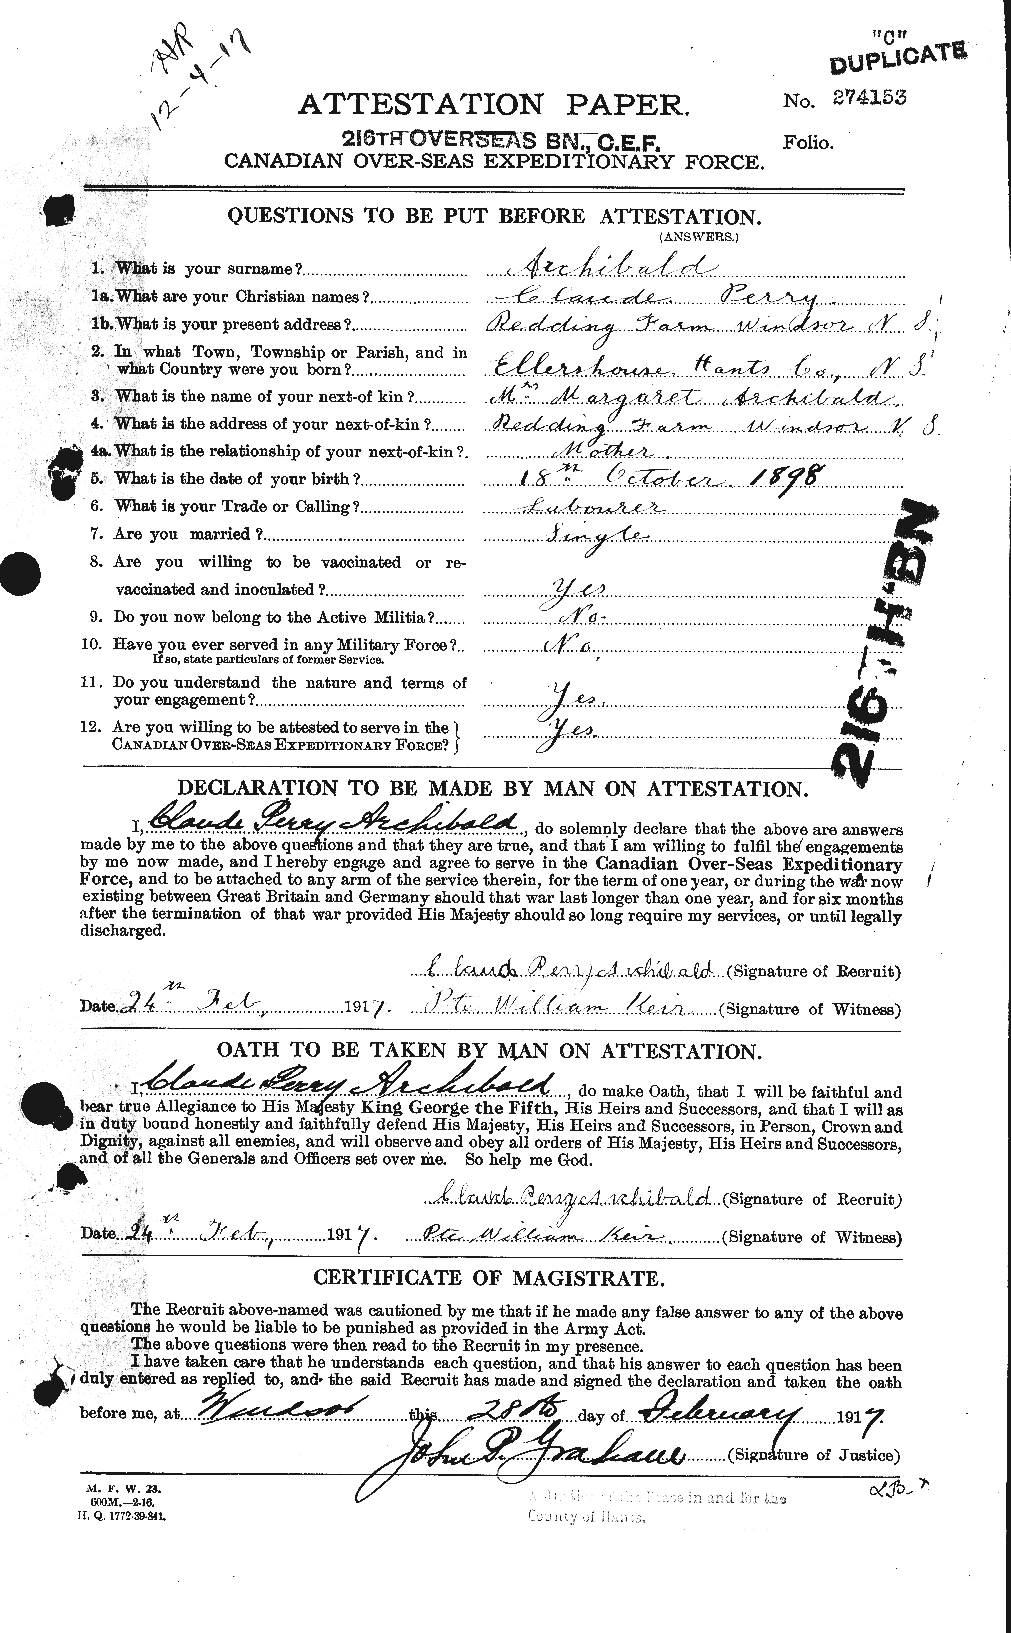 Personnel Records of the First World War - CEF 211638a